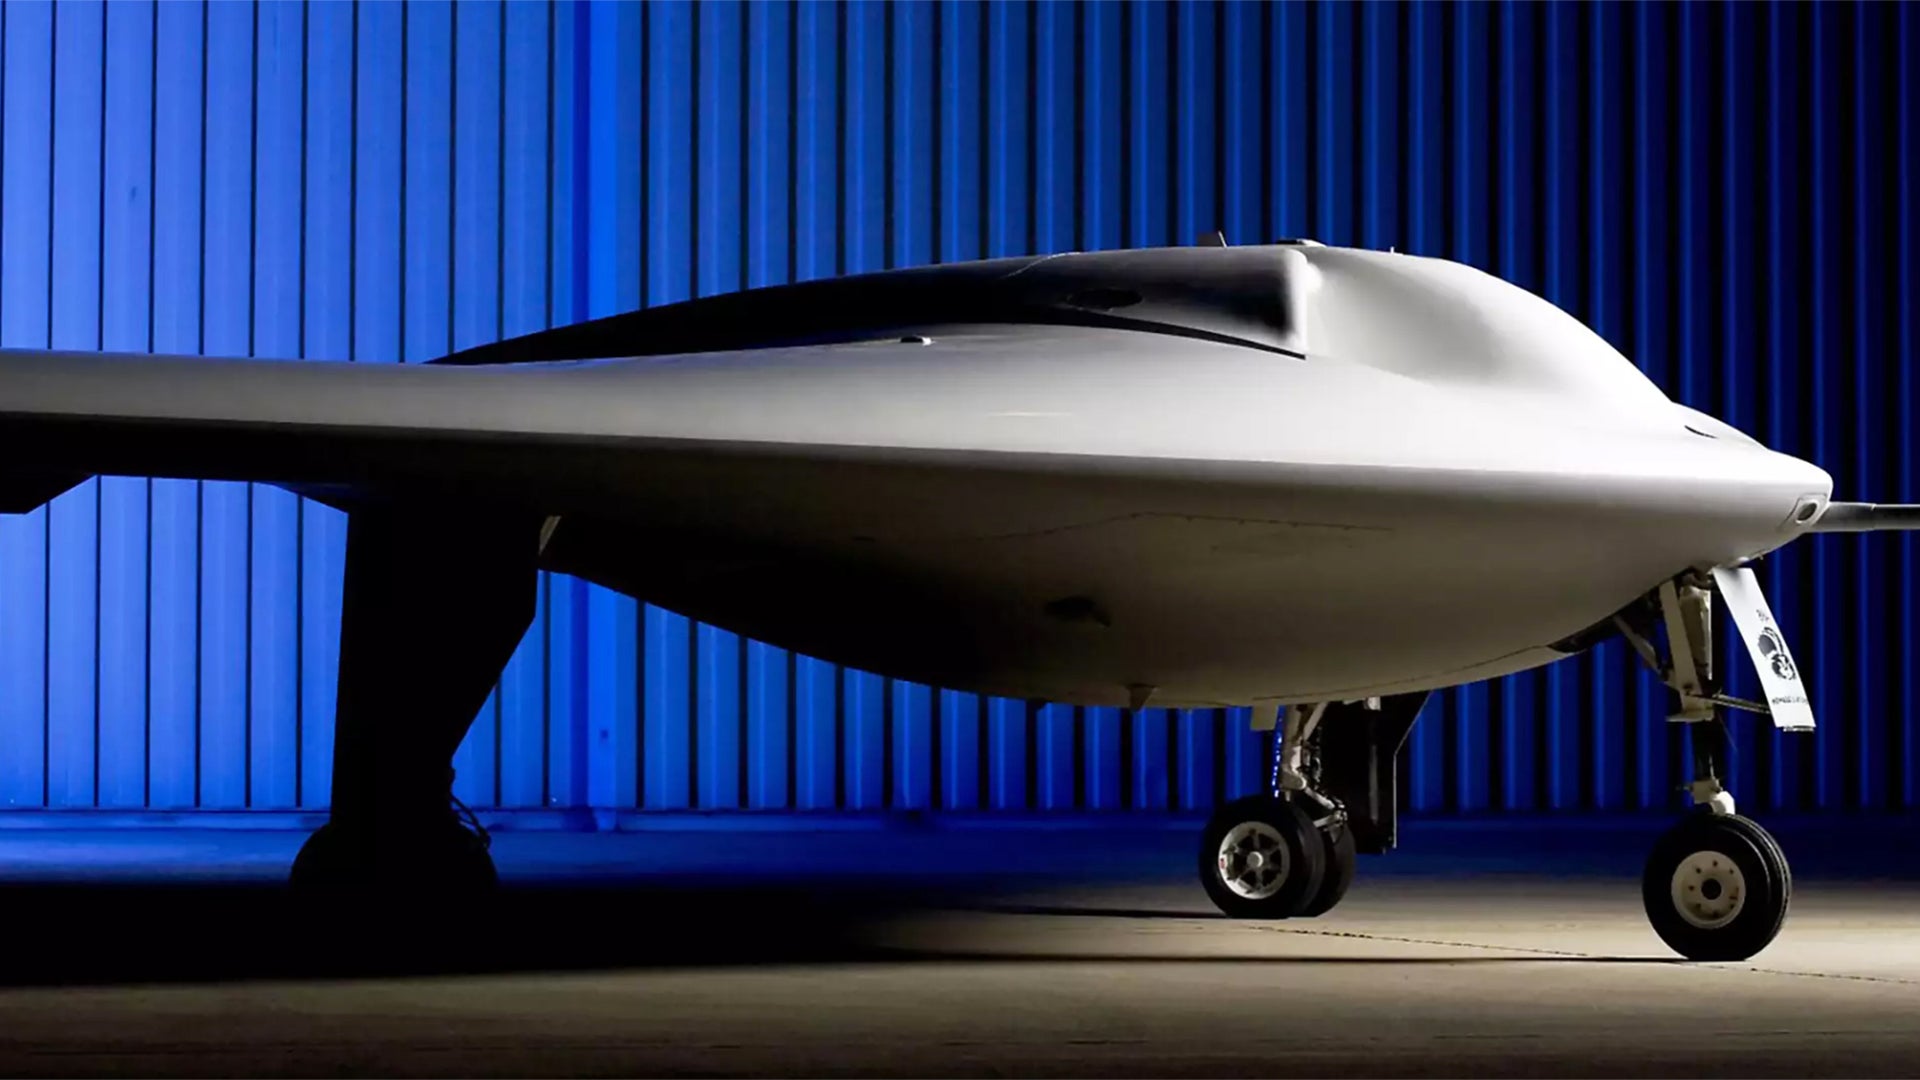 For Lockheed Martin’s Skunk Works, It’s All About Getting To The Prototype Stage